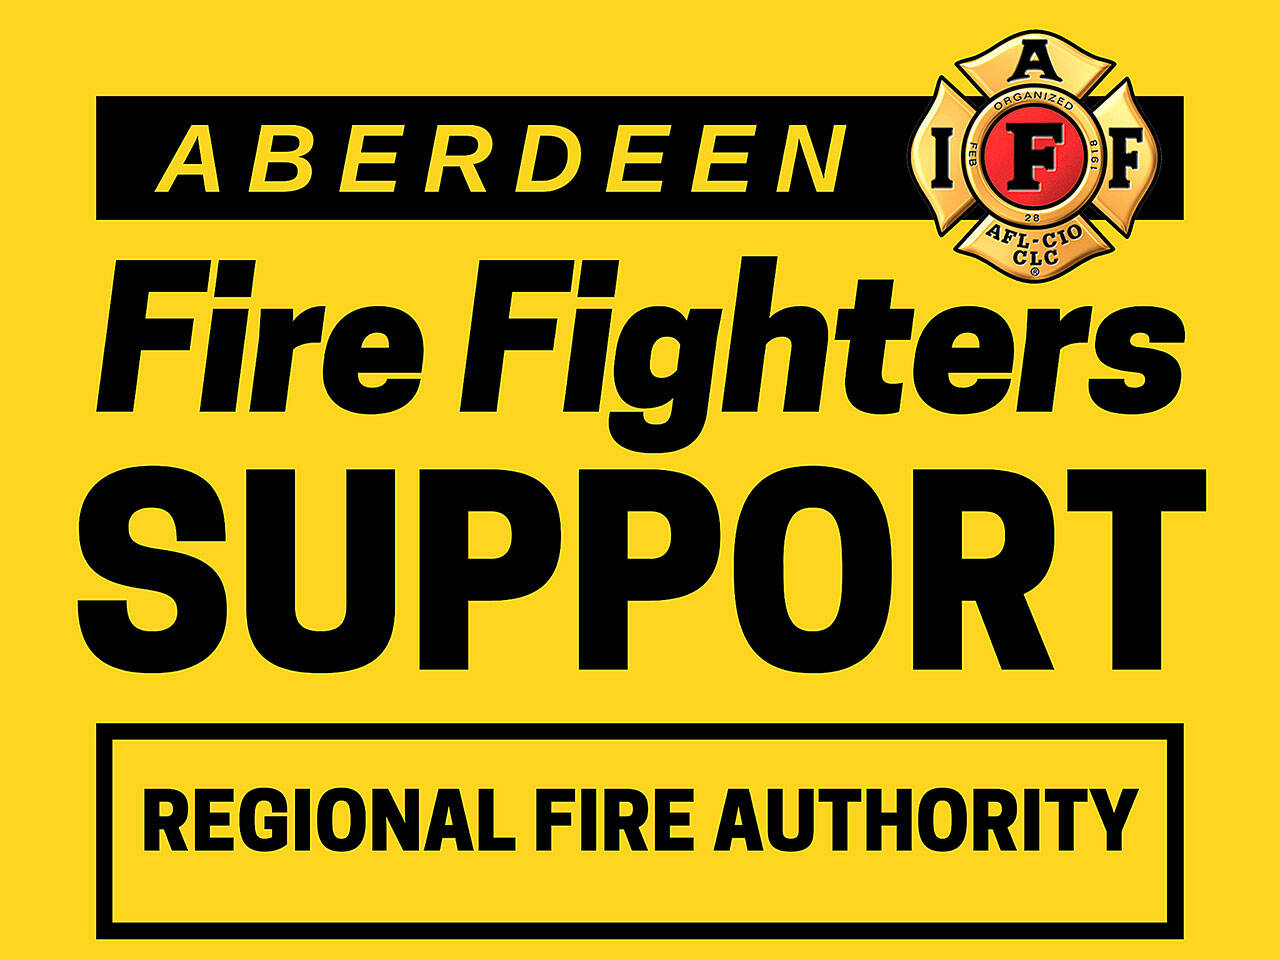 The Aberdeen-Hoquiam RFA measure is passing by a slight margin in Aberdeen and failing in Hoquiam after the second round of general election ballots were counted Friday, Nov. 5. Both cities’ firefighters unions support the measure. (Courtesy image)